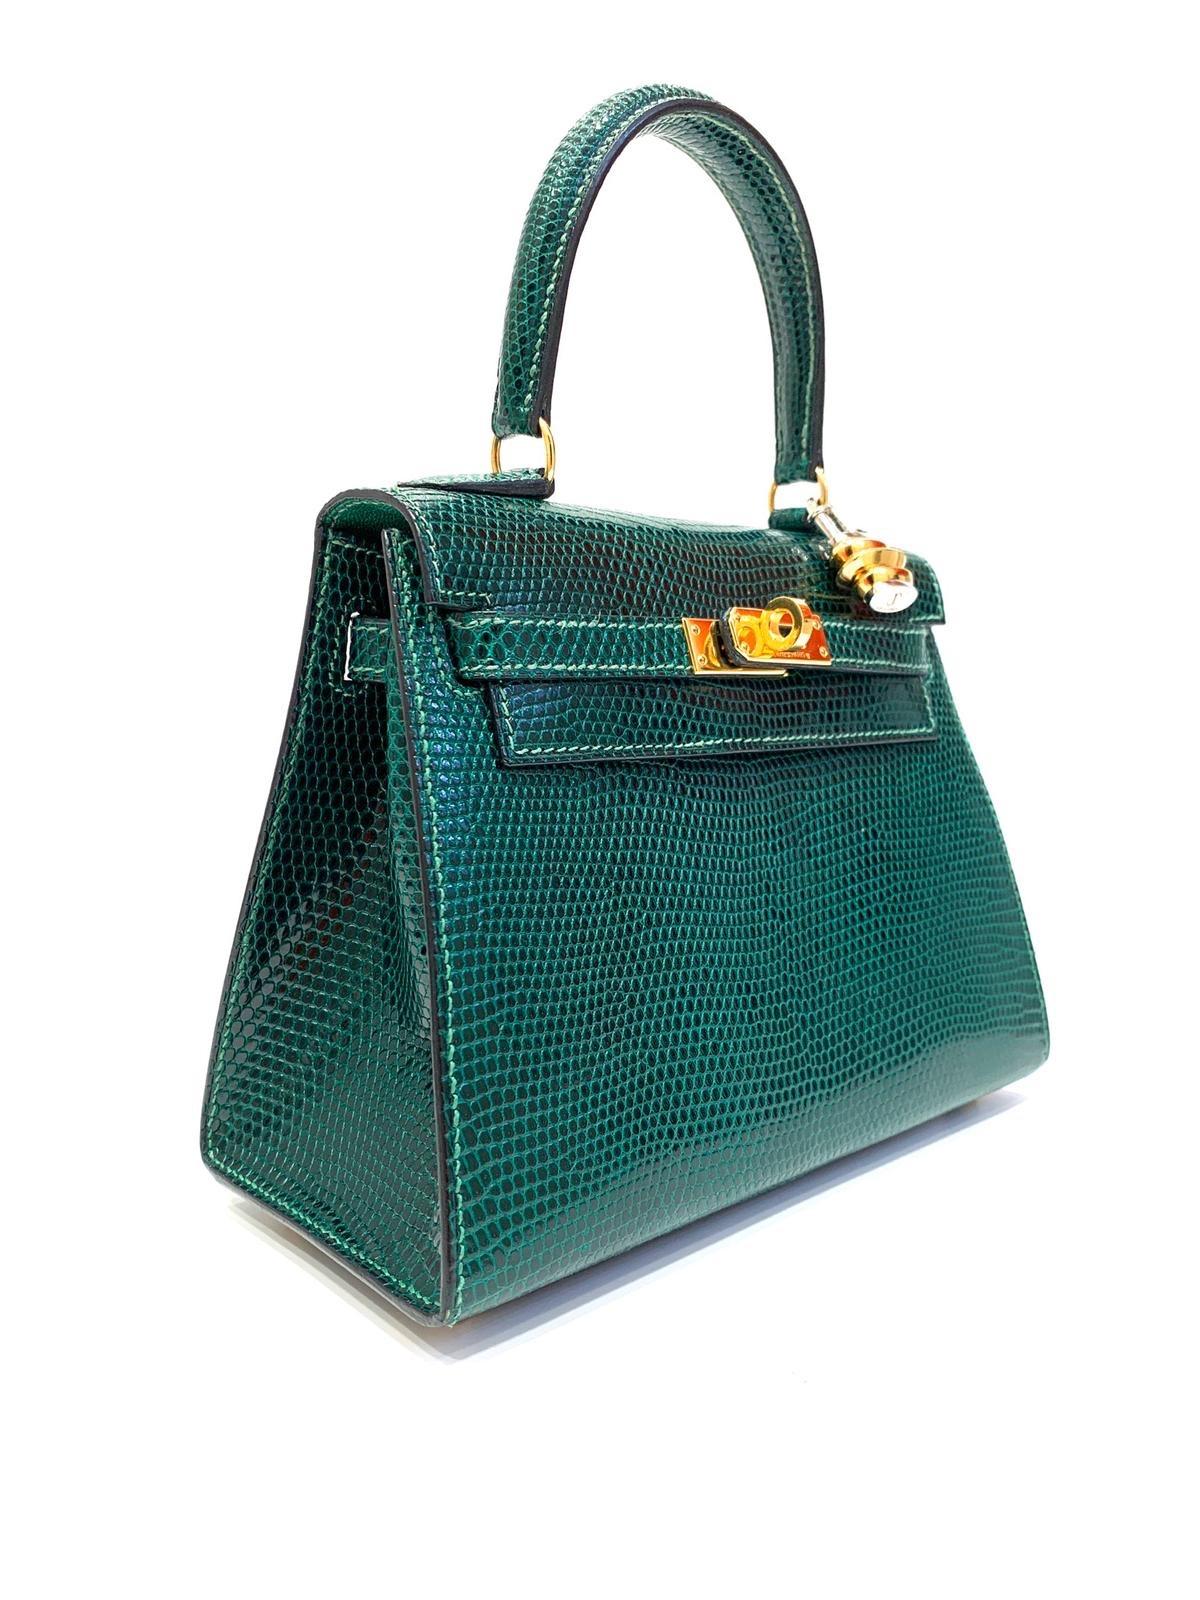 Very rare bag, Hermès mini Kelly 20 cm  Sellier green lizard with goldtone hardware. 
Date stamp Z for 1996. Comes with original dust-bag.
Good Condition, Guaranteed authentic Hermes Kelly 20 Sellier bag features a rare combination of lizard green.